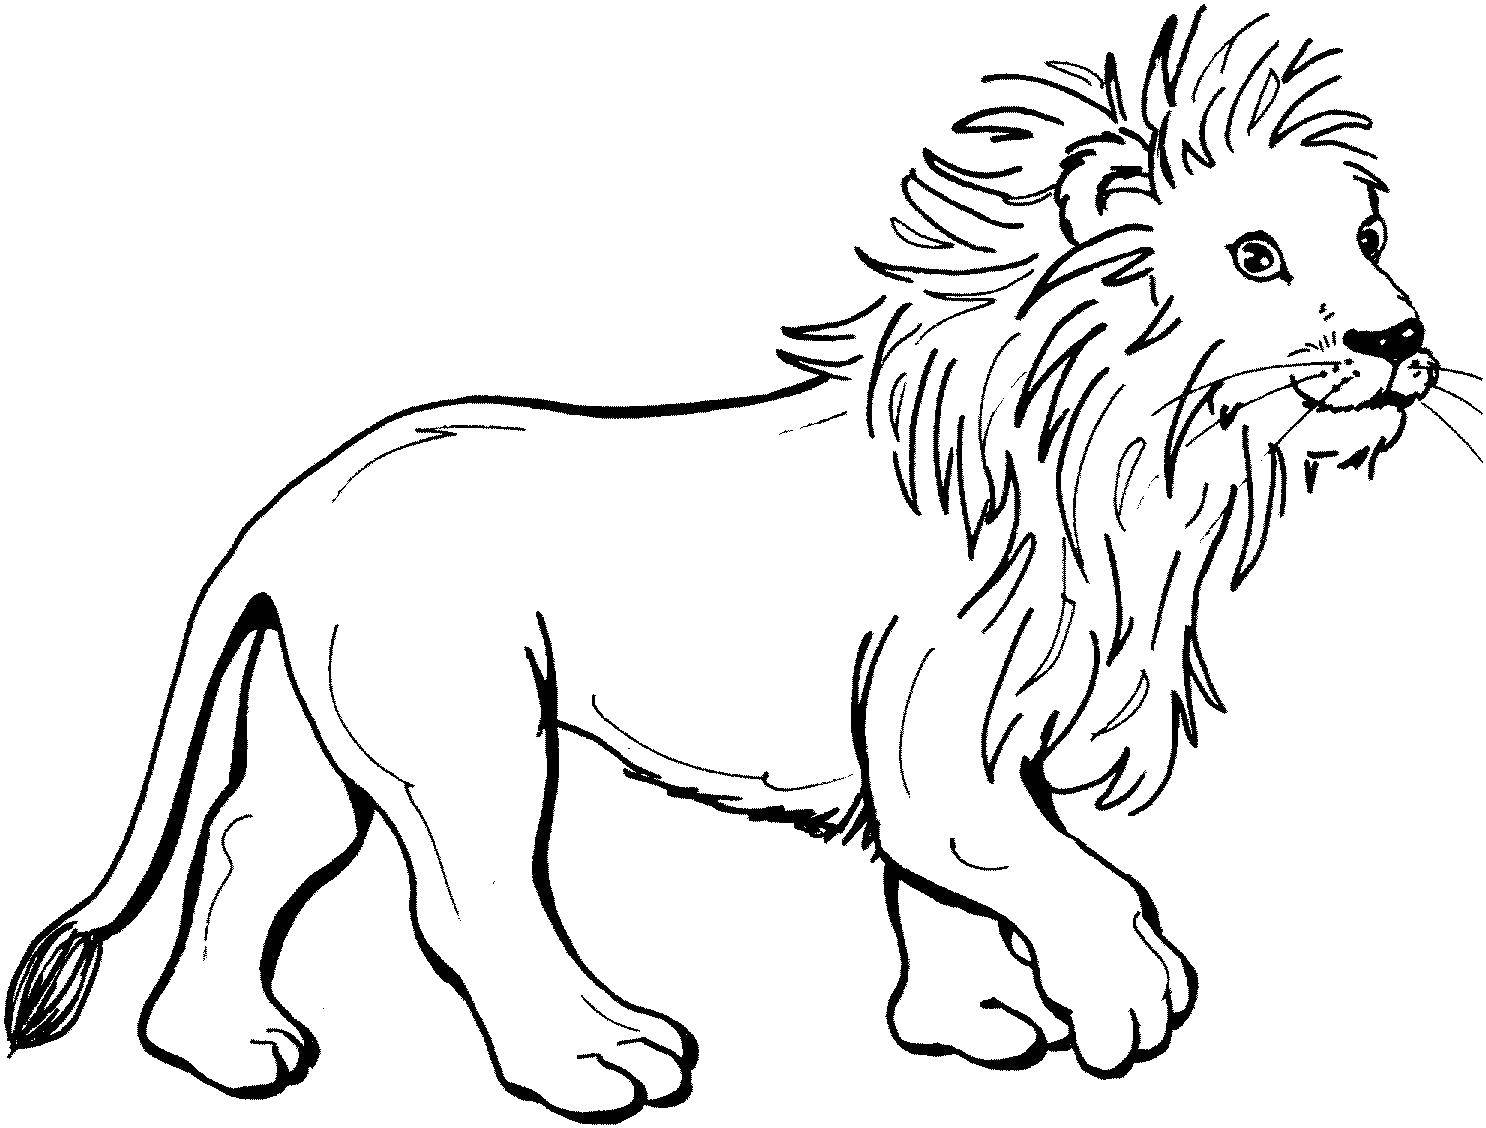 Coloring Good lion. Category Animals. Tags:  Animals, lion.